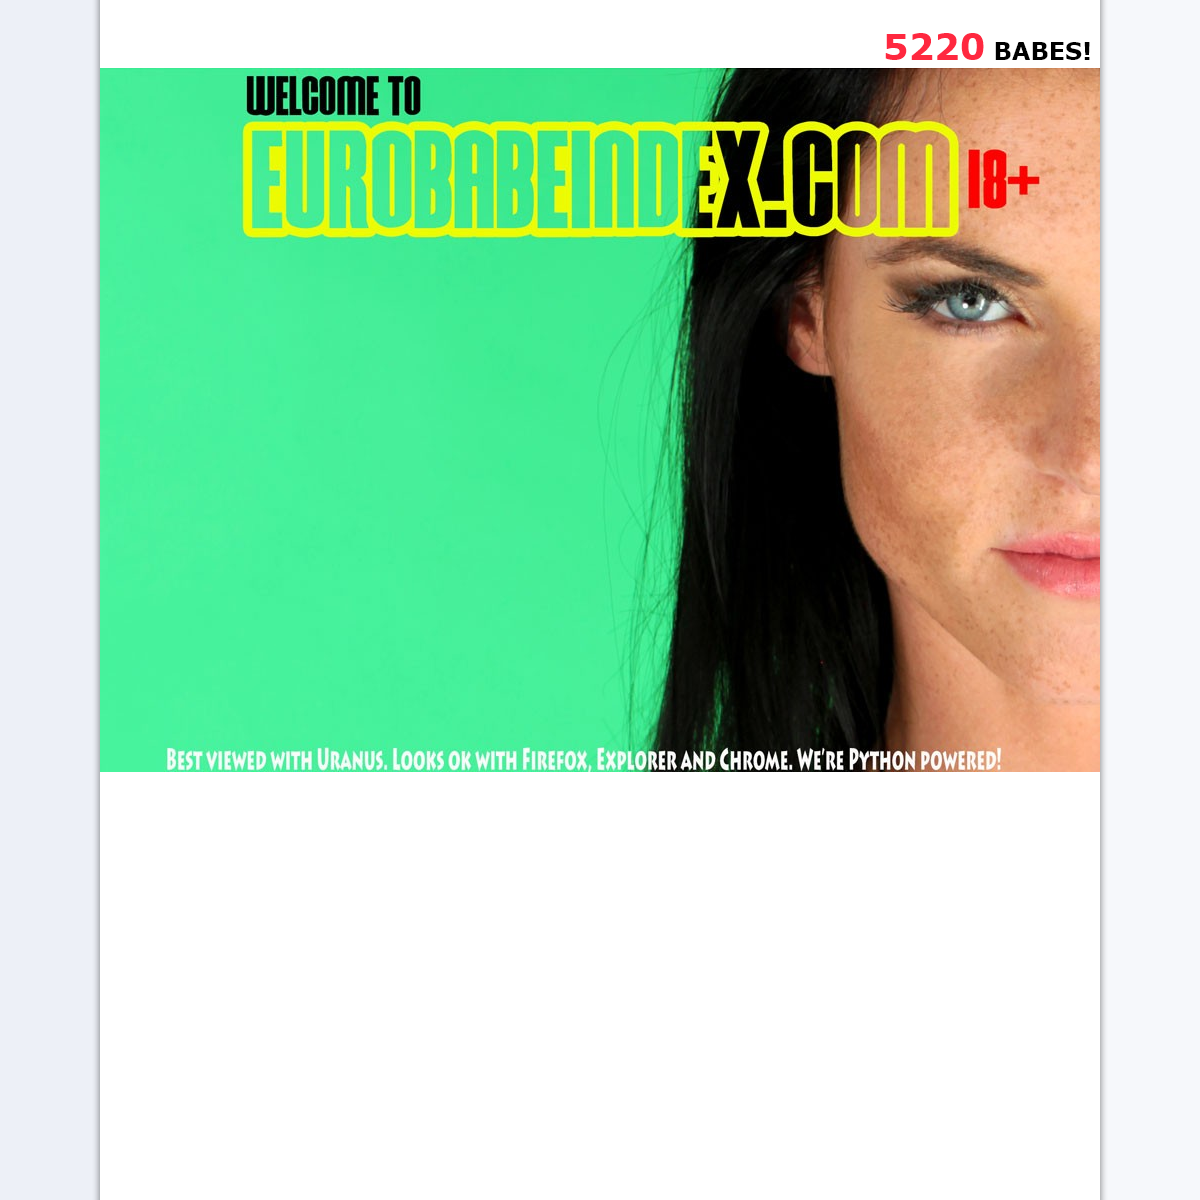 A complete backup of www.www.eurobabeindex.com